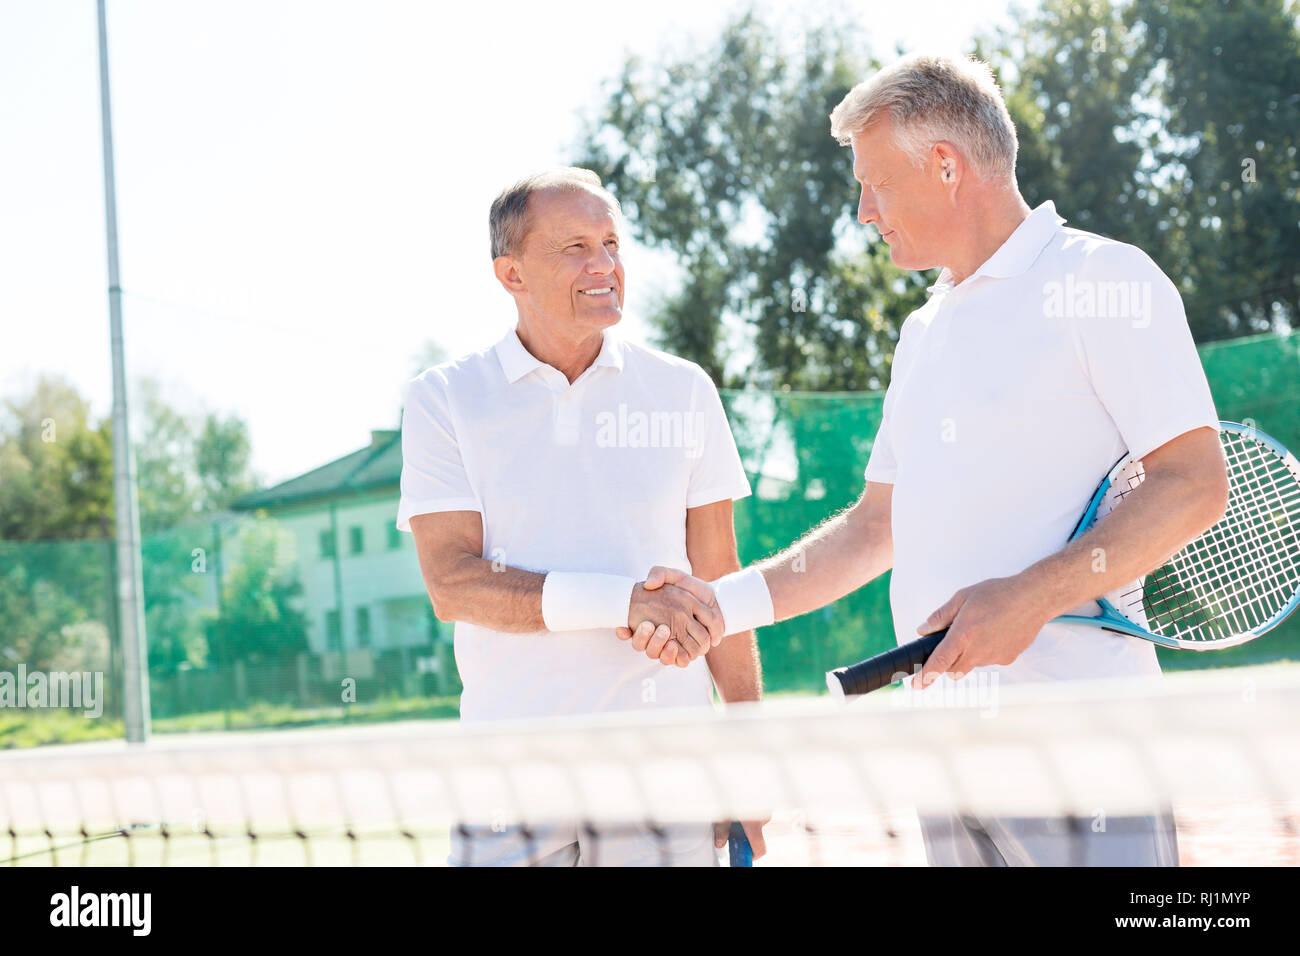 Smiling men greeting while standing on tennis court during summer match Stock Photo